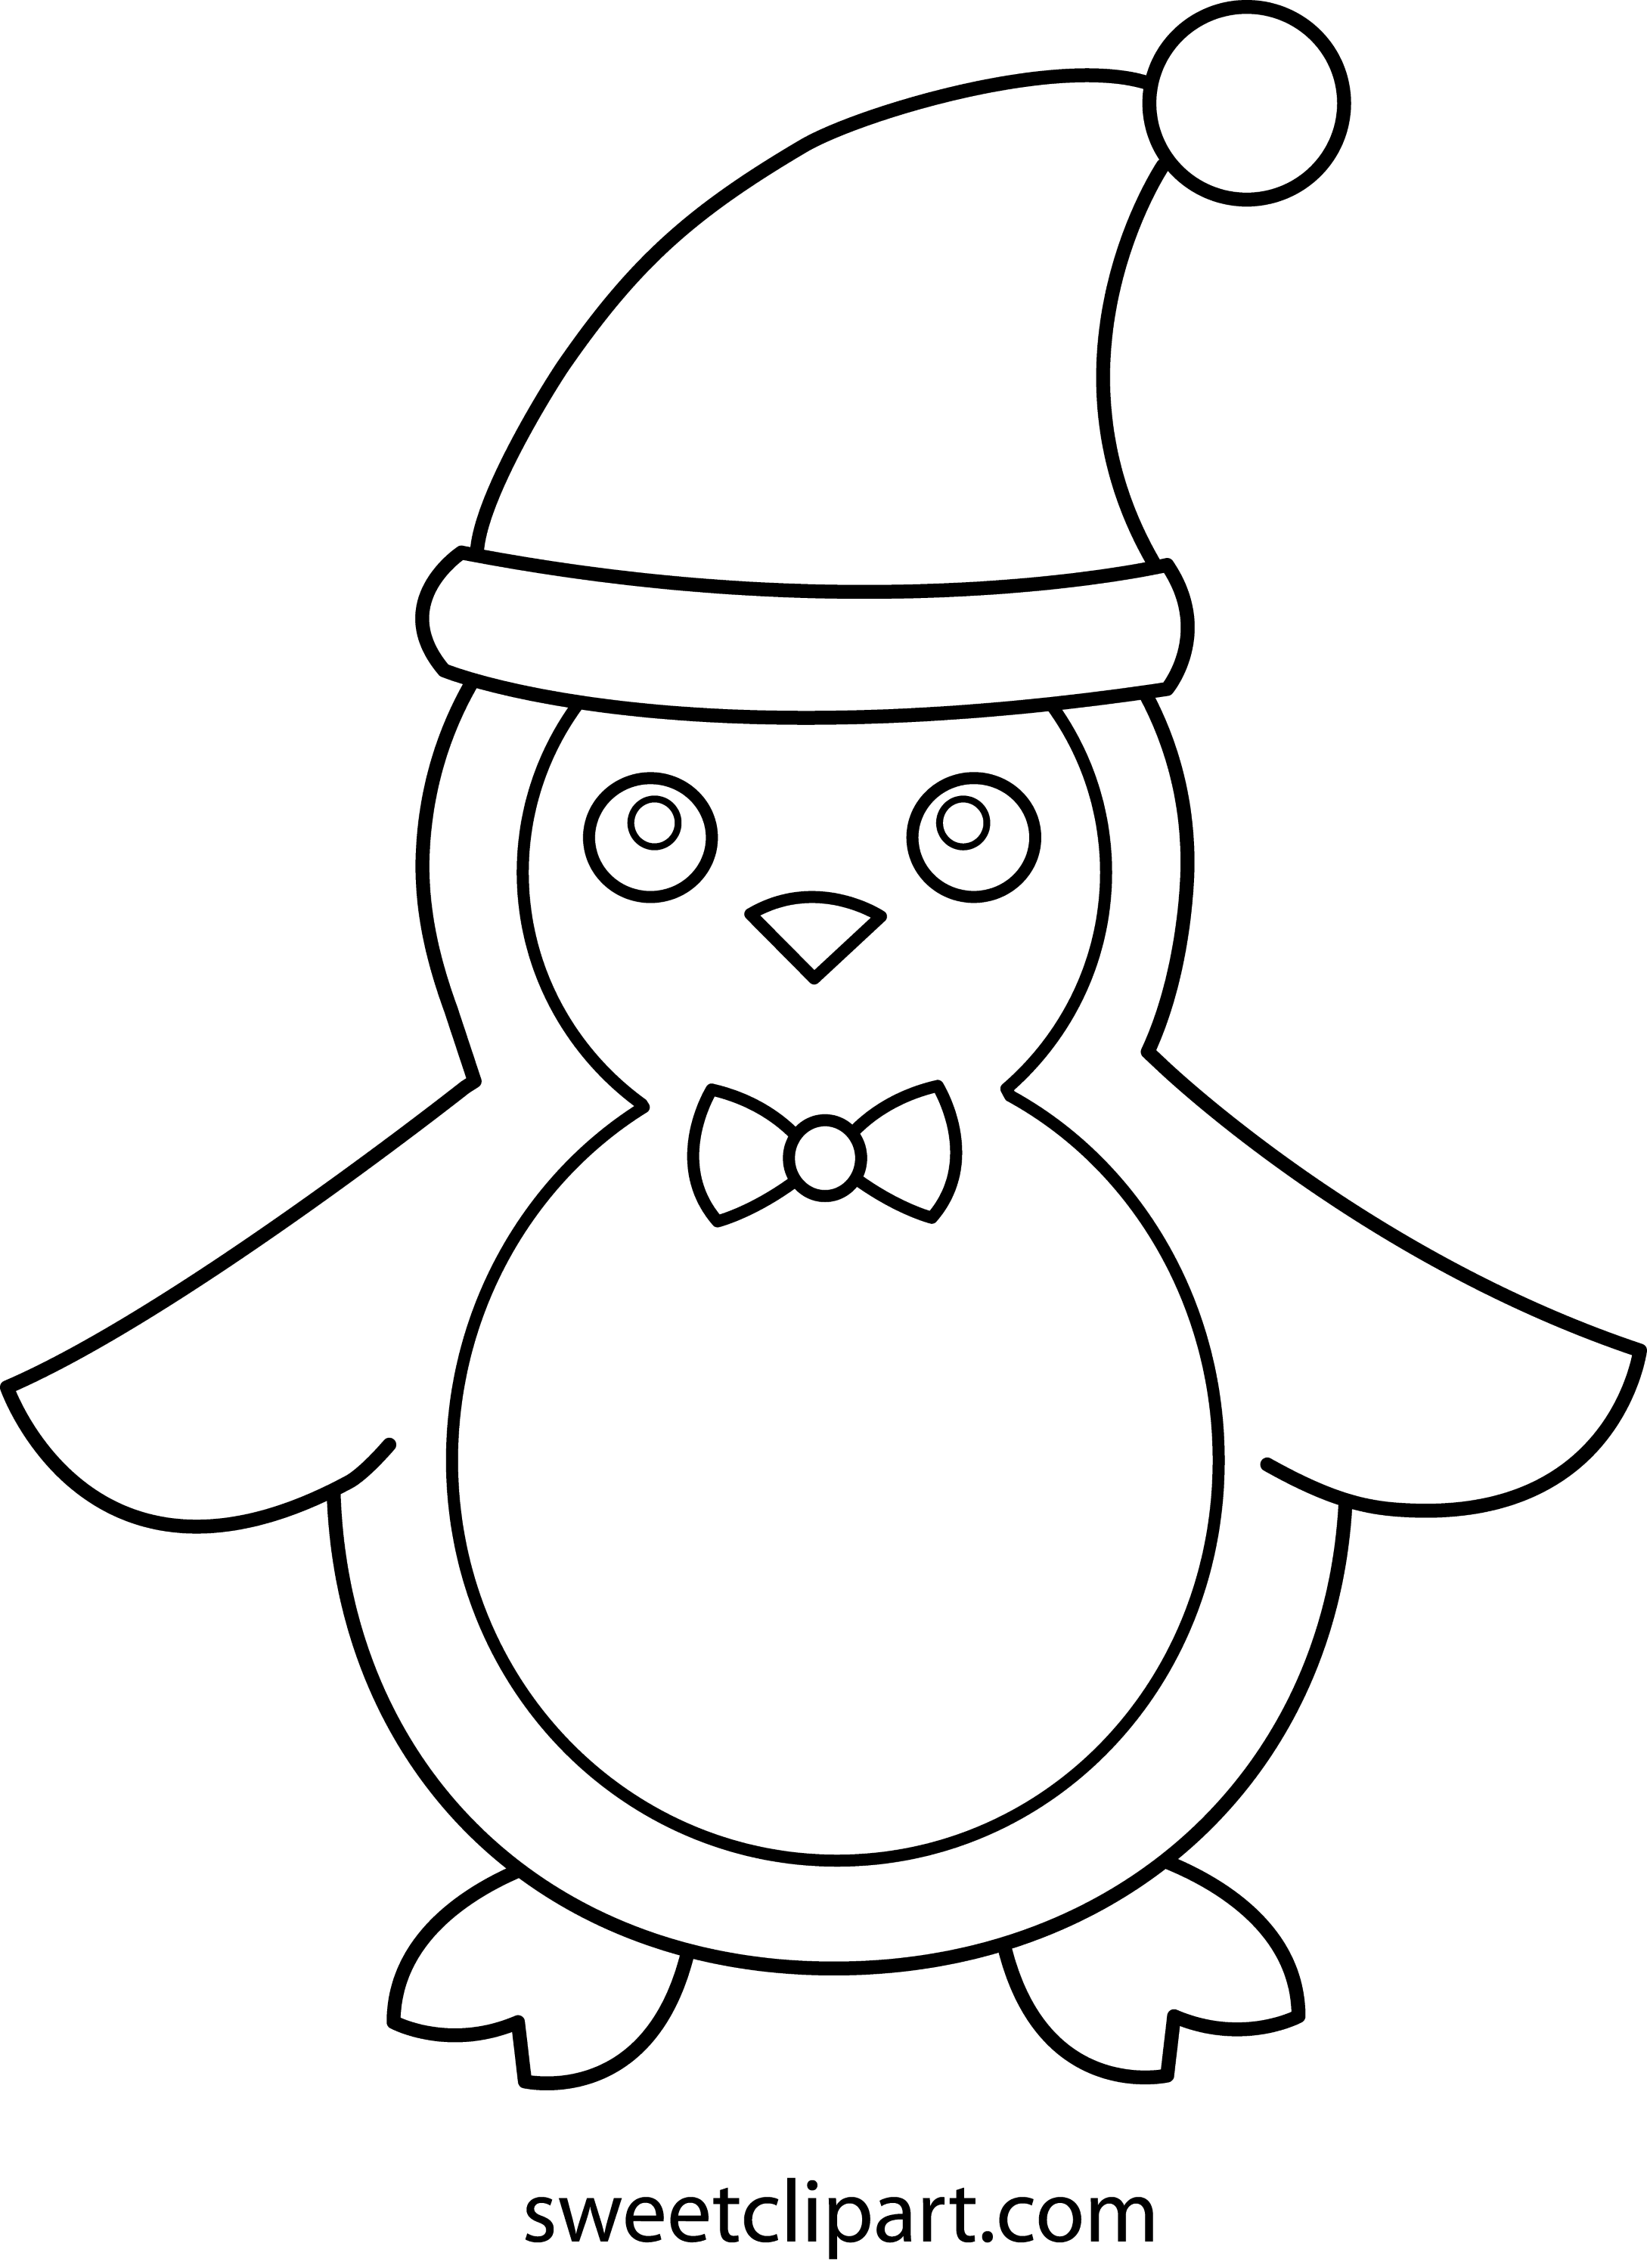 Christmas Penguin Coloring Page - Free Clip Art